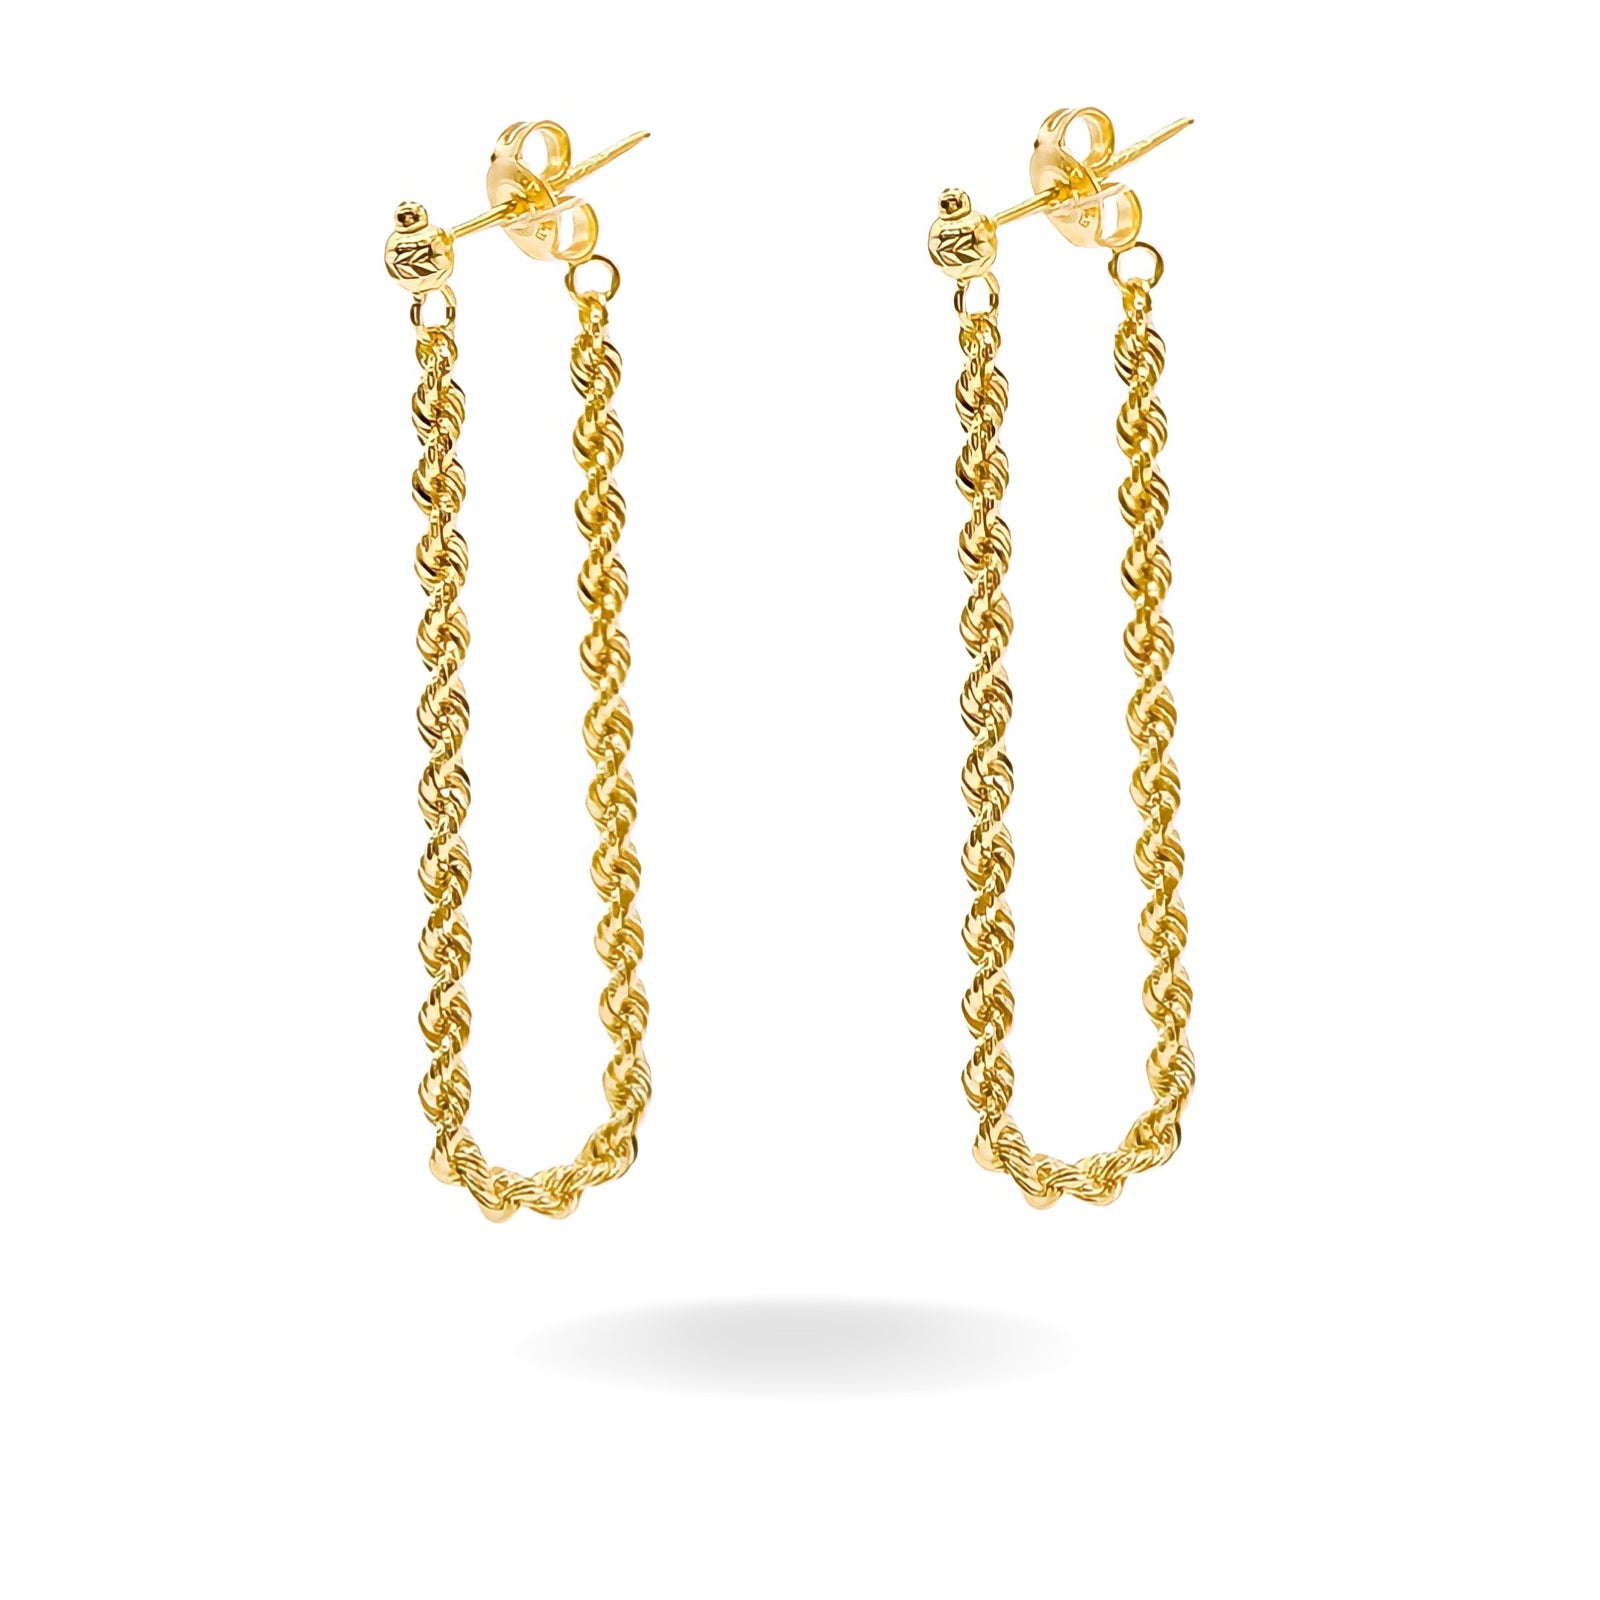 14K YELLOW GOLD ROPE CHAIN CONNECT DROP EARRINGS